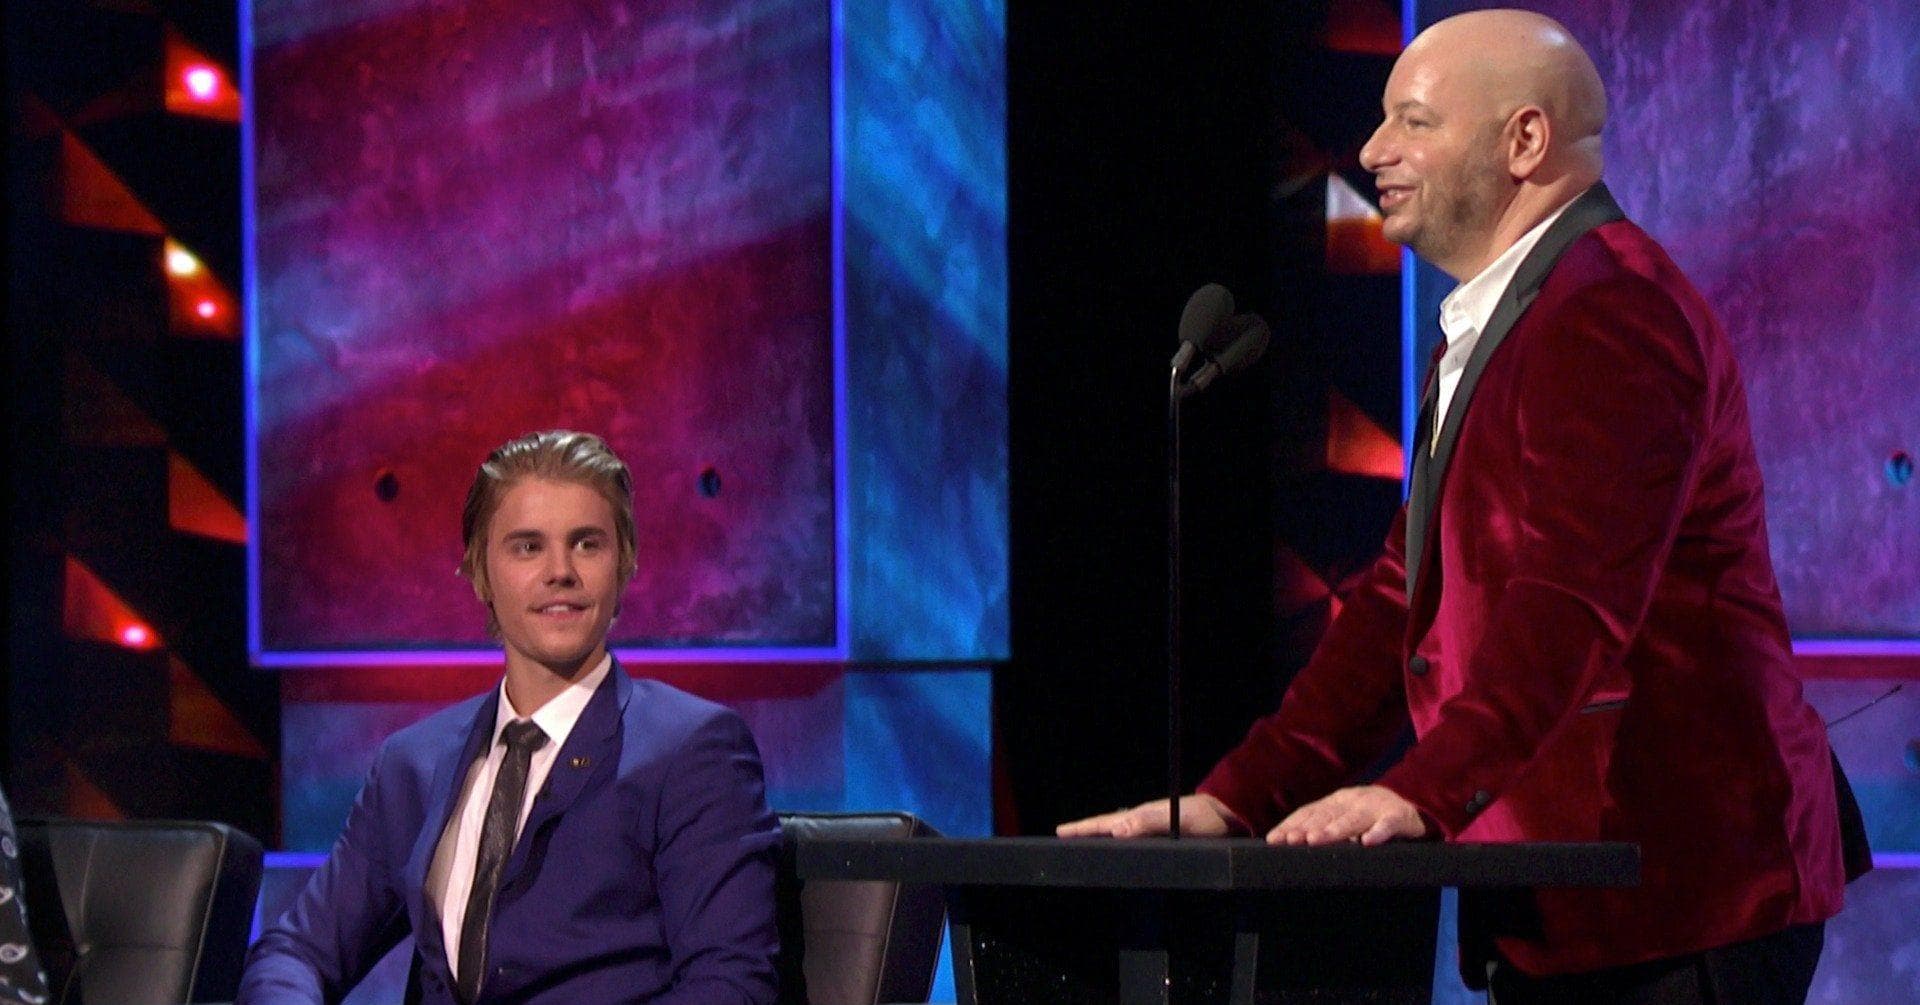 Comedy Central Roast New All Comedy Central Roast Episodes, Ranked Best To Worst